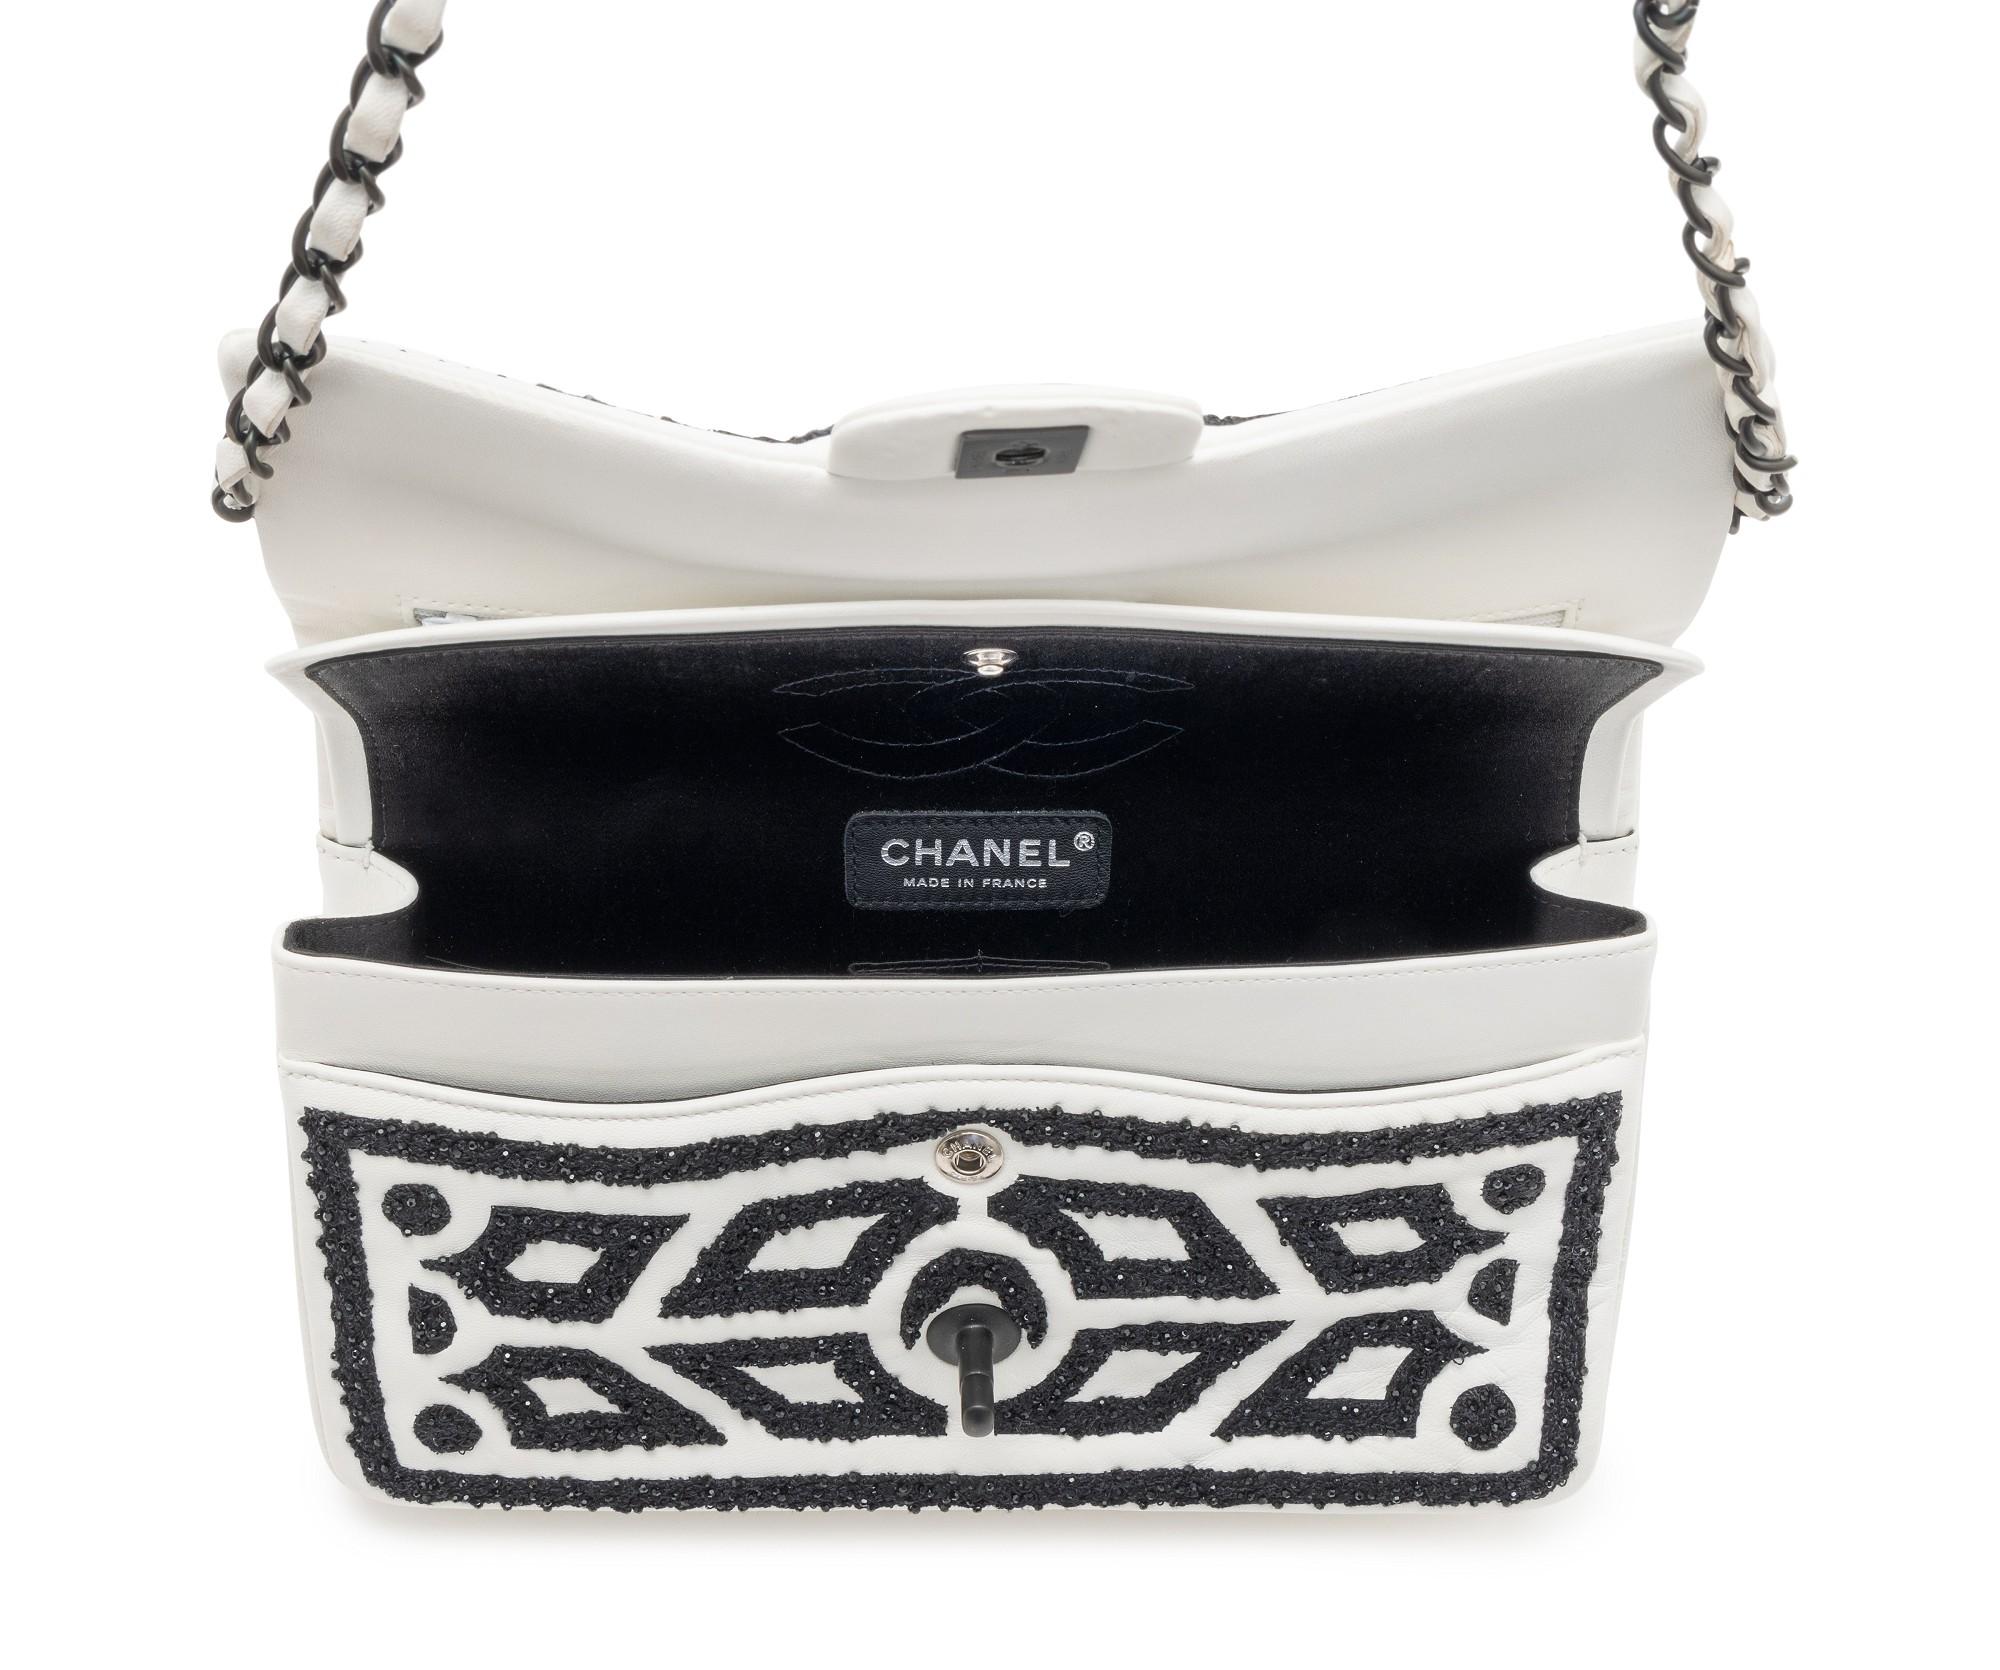 Chanel 2011 Vintage Classic Flap White and Black Lambskin Leather Shoulder Bag For Sale 3